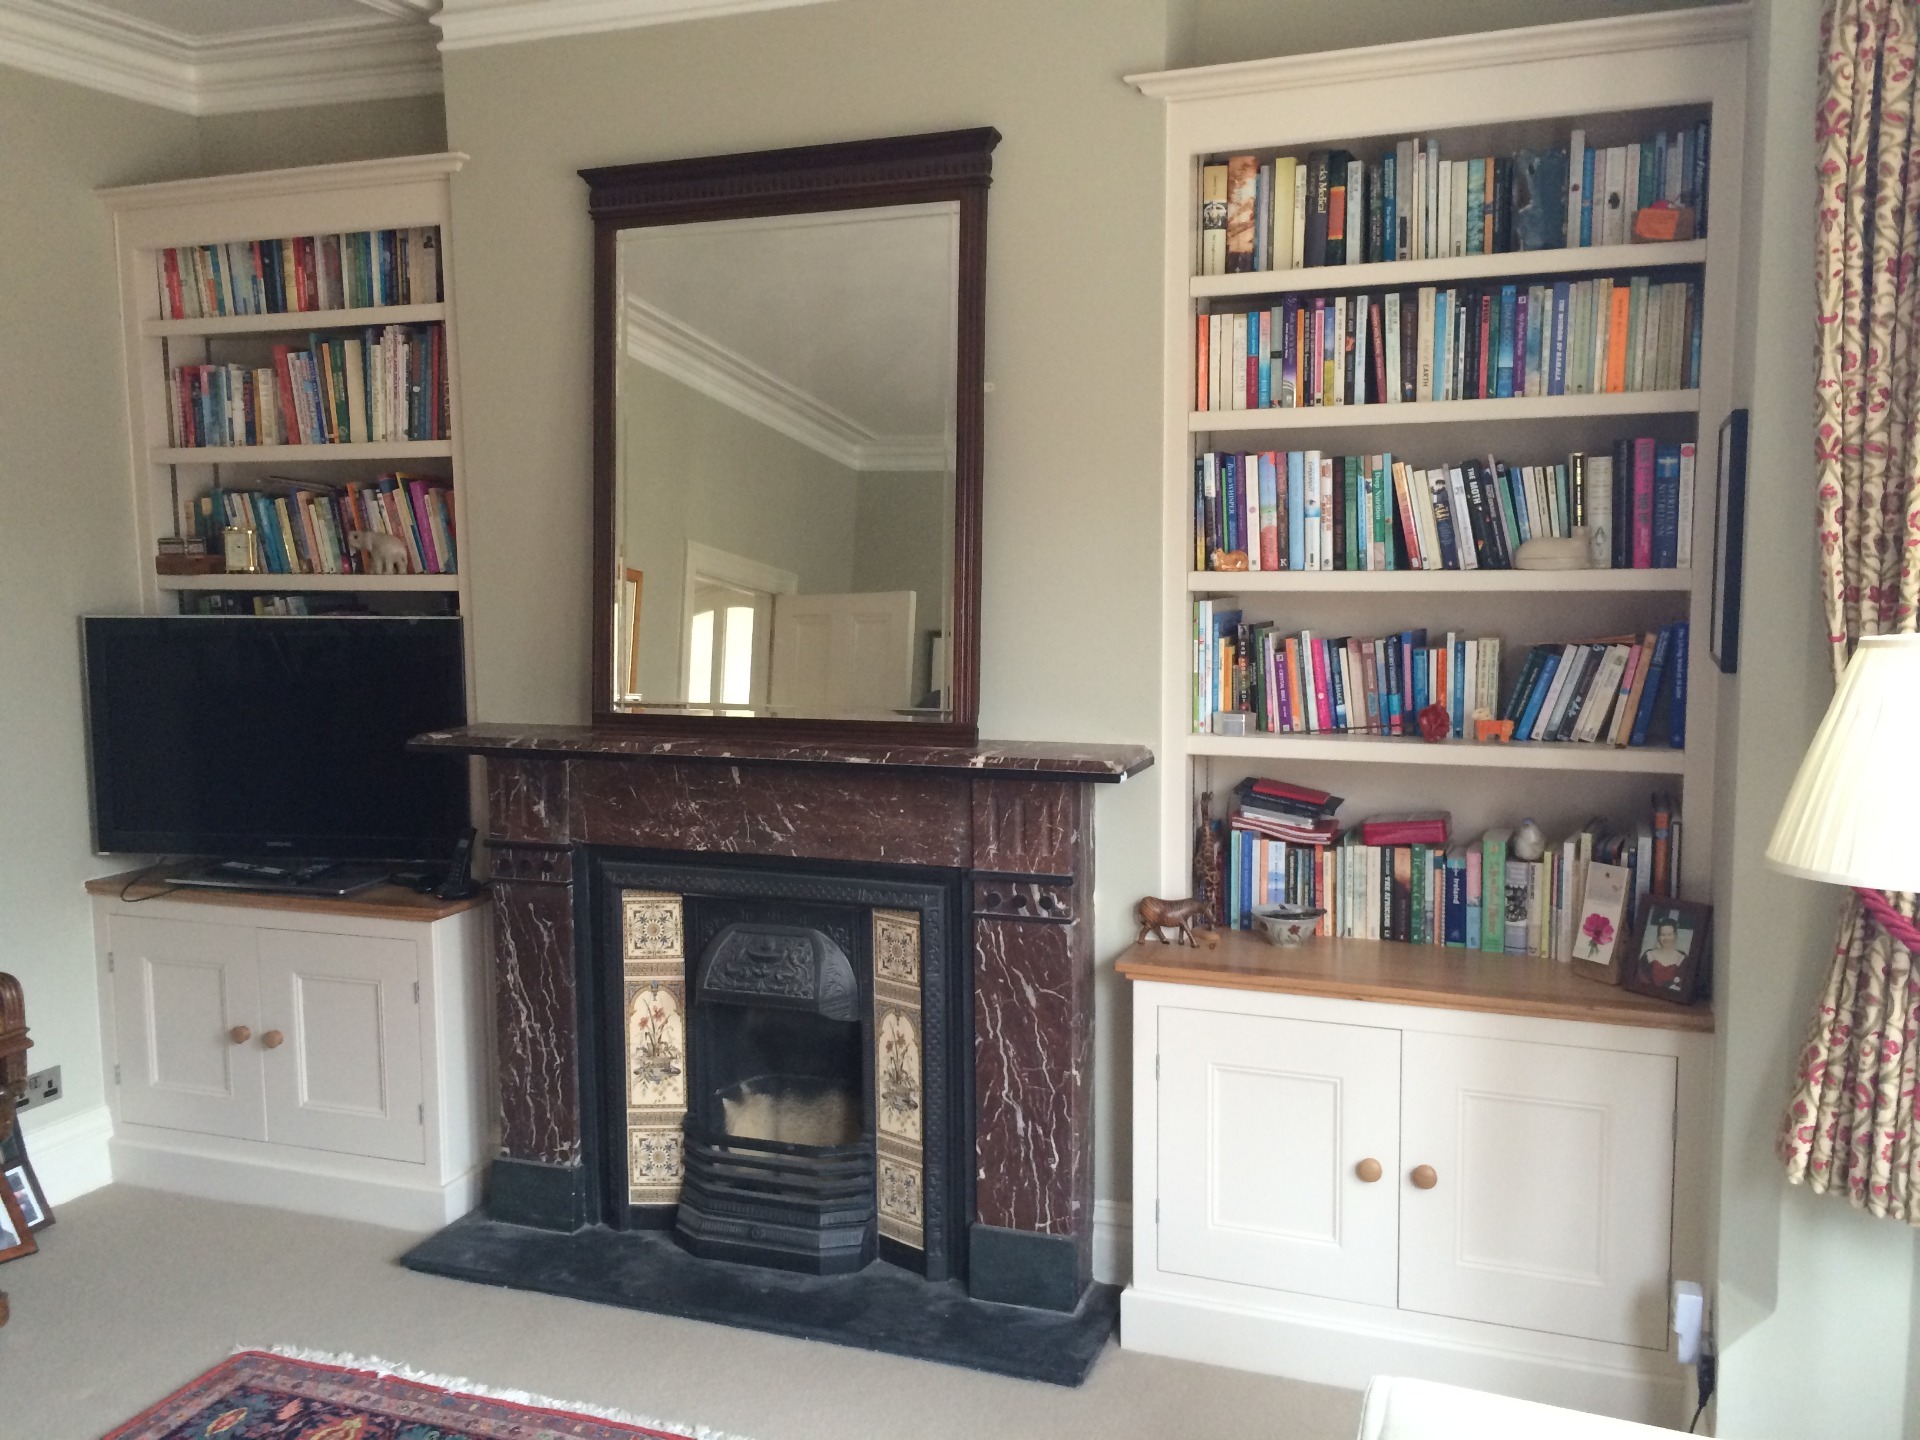 Bespoke bookcases in alcoves